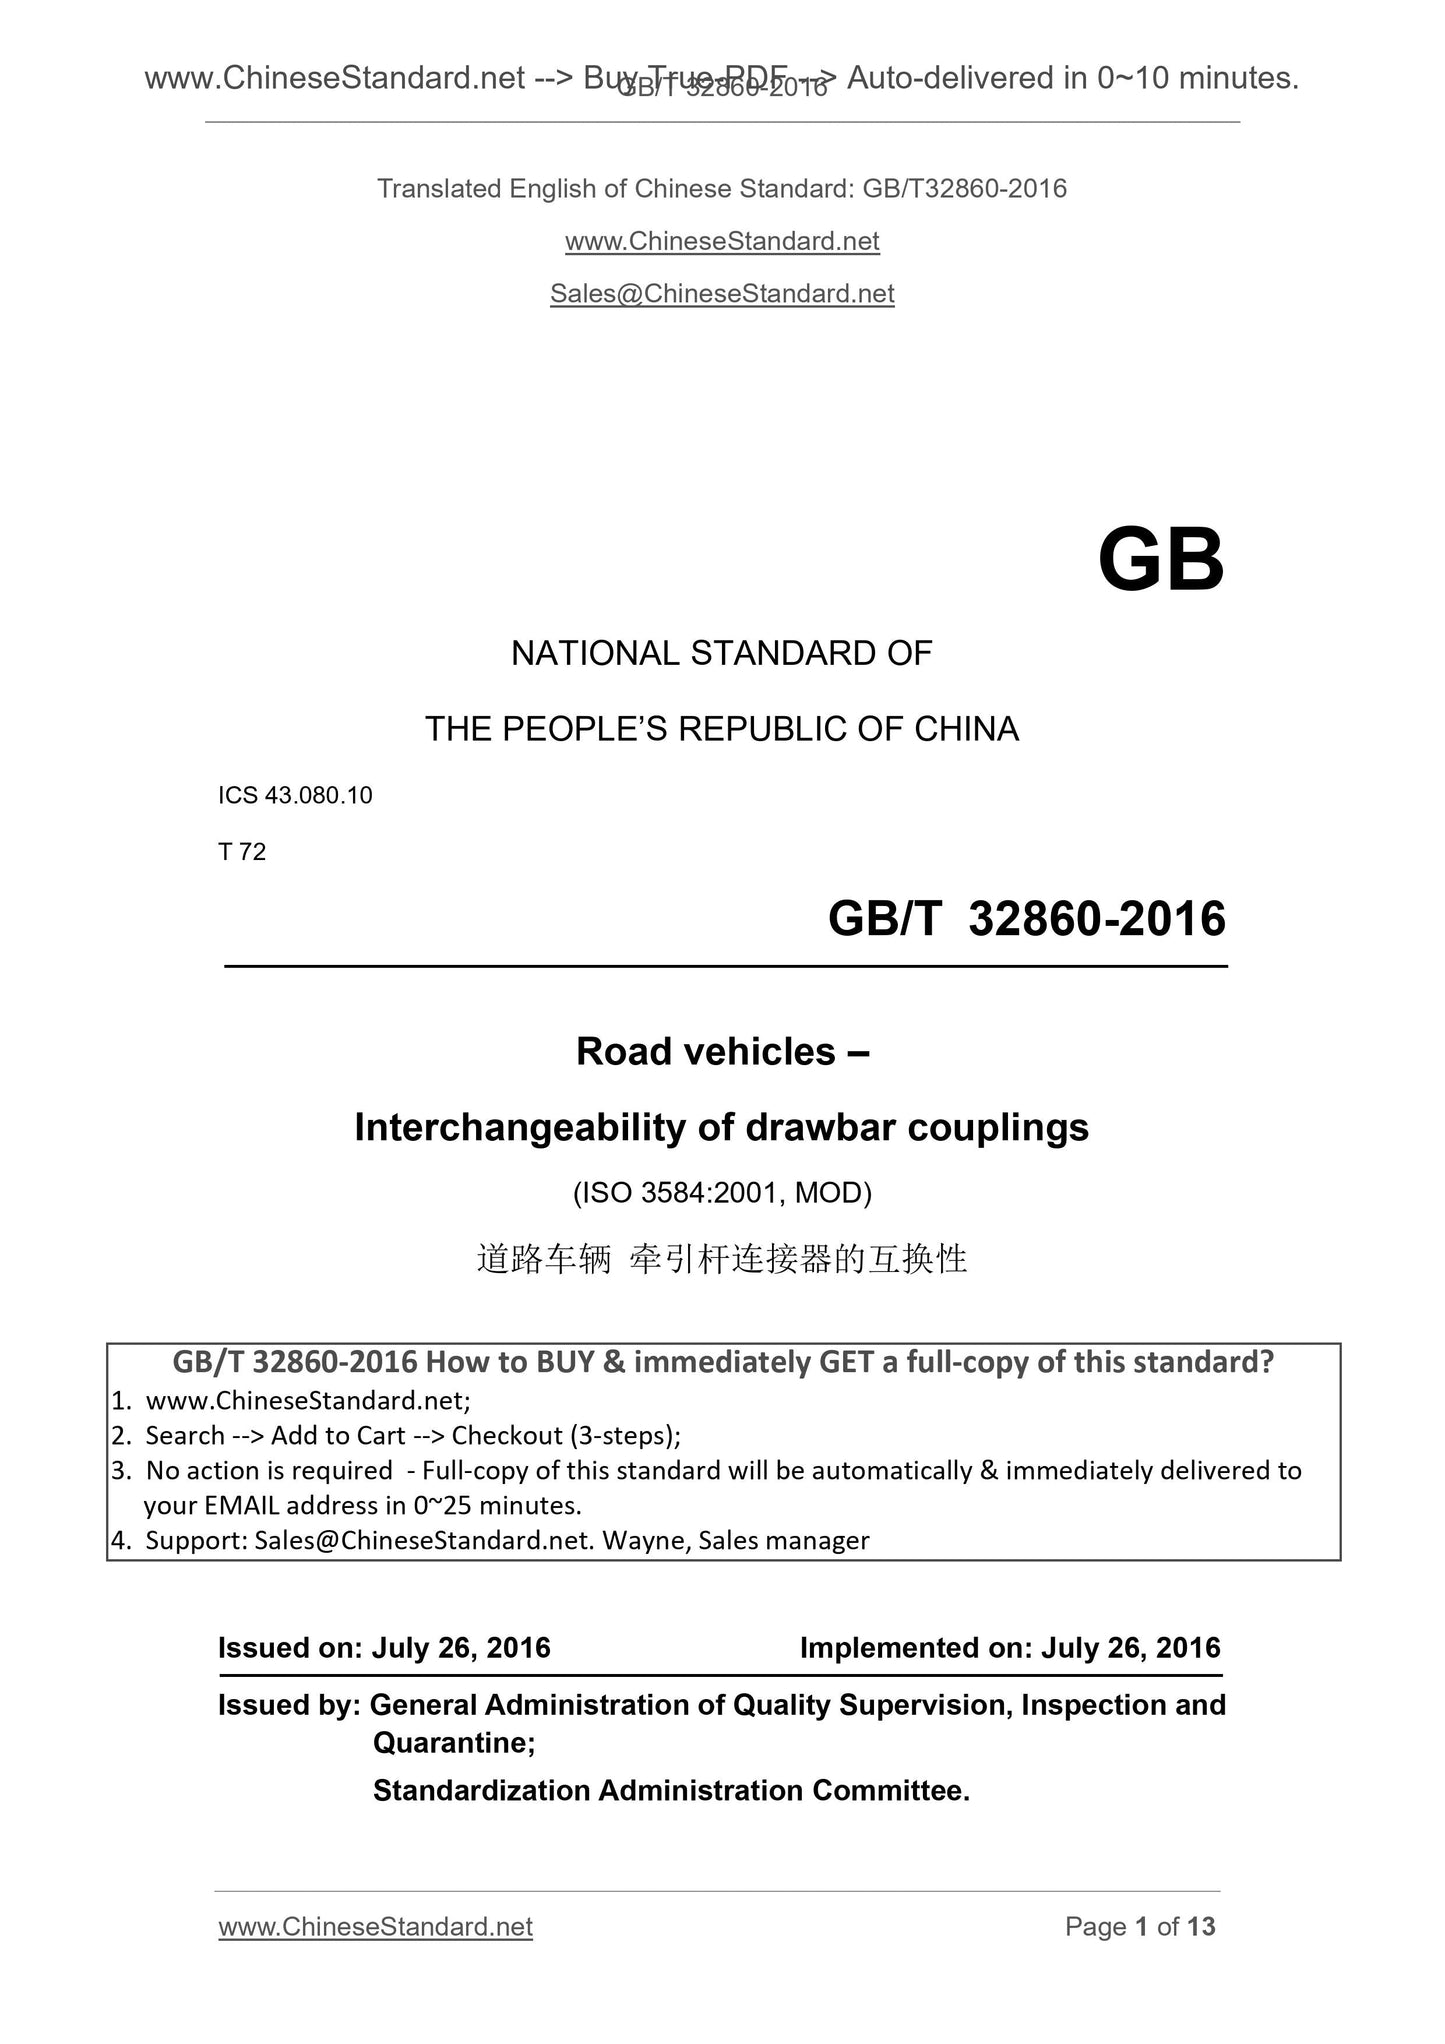 GB/T 32860-2016 Page 1